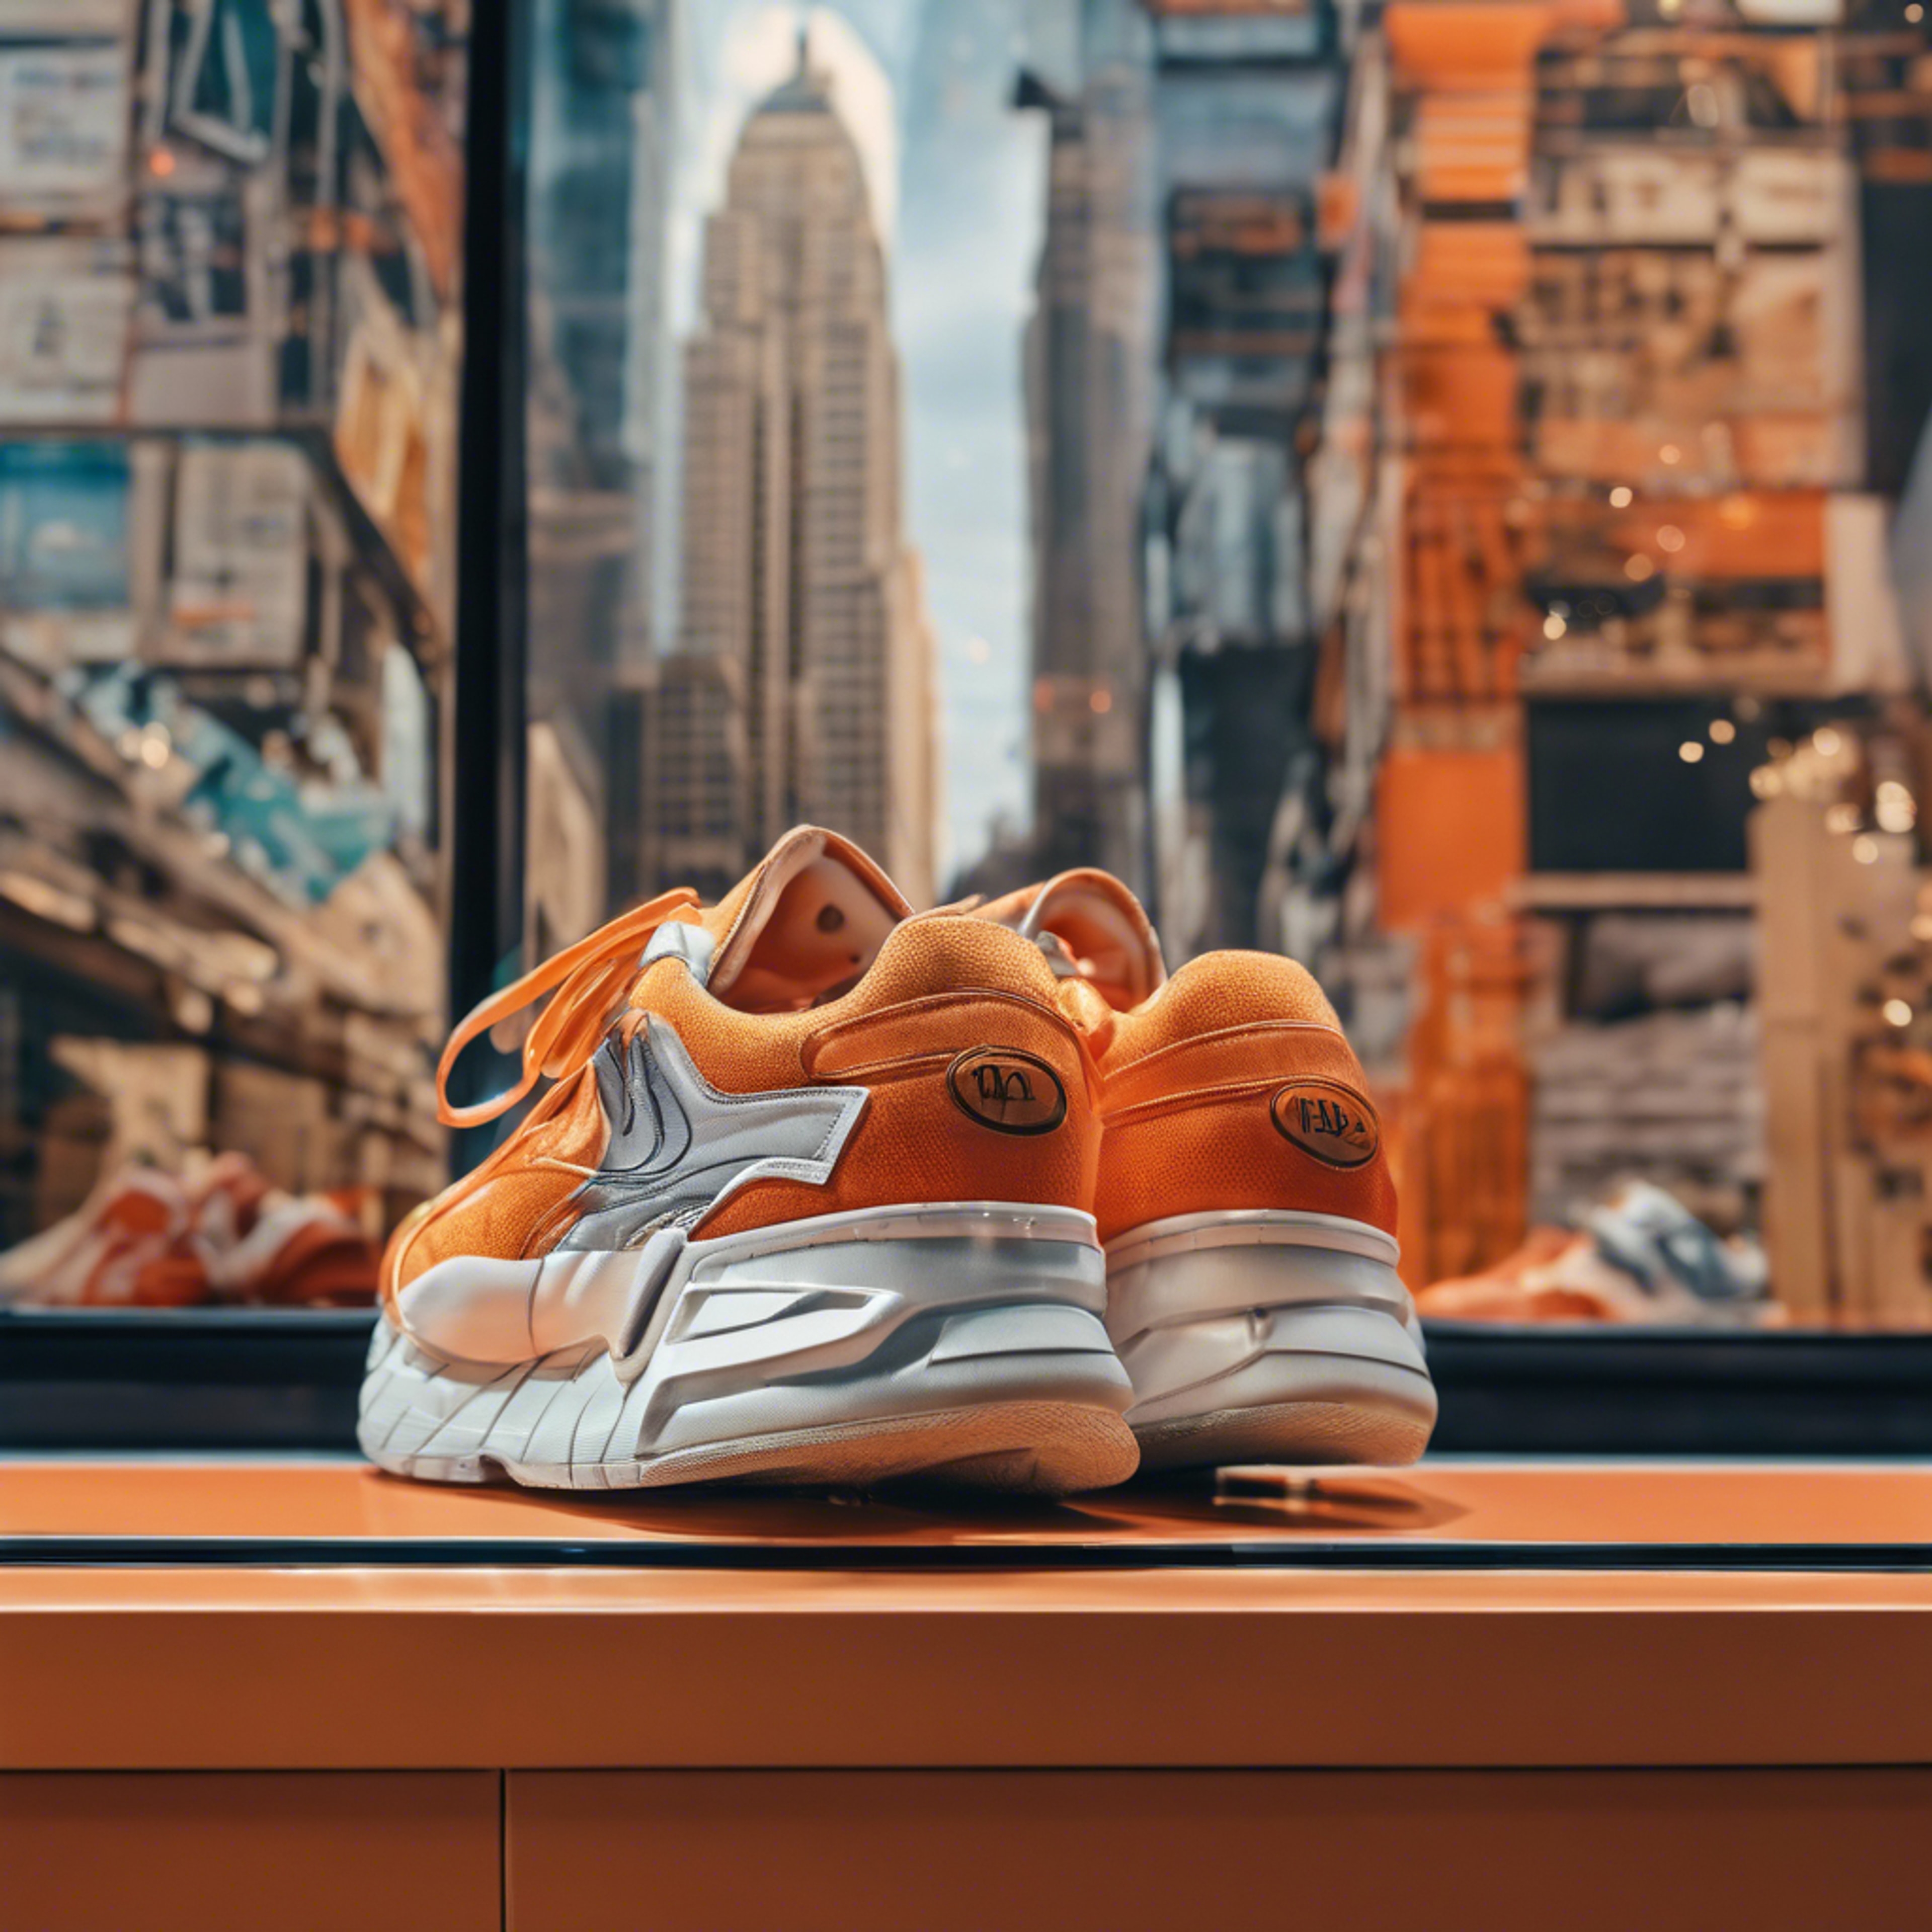 Orange Y2K-inspired sneakers displayed in a shoe store window with a retro cityscape backdrop. ផ្ទាំង​រូបភាព[c42ef01953ac4184b365]